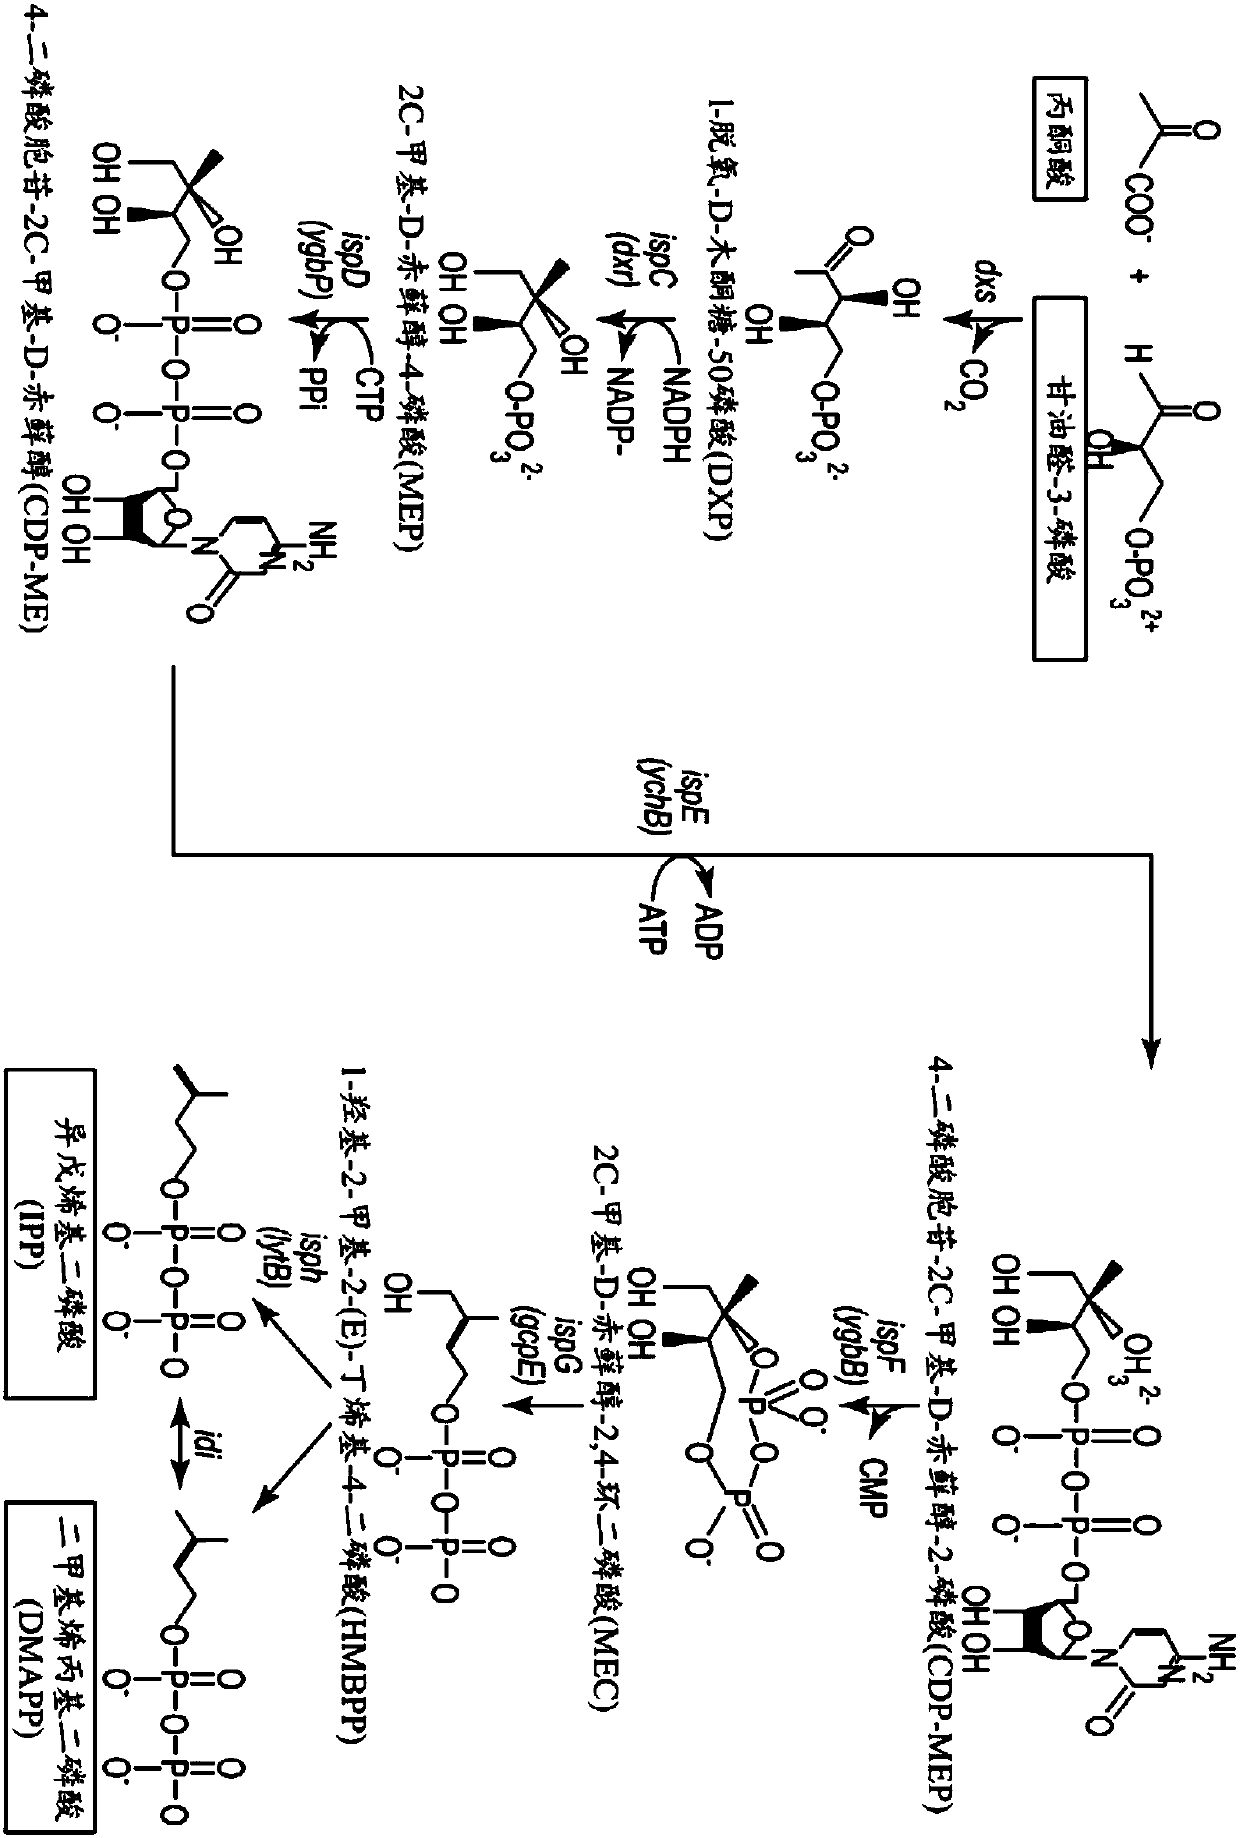 Fermentation methods for producing steviol glycosides with multi-phase feeding